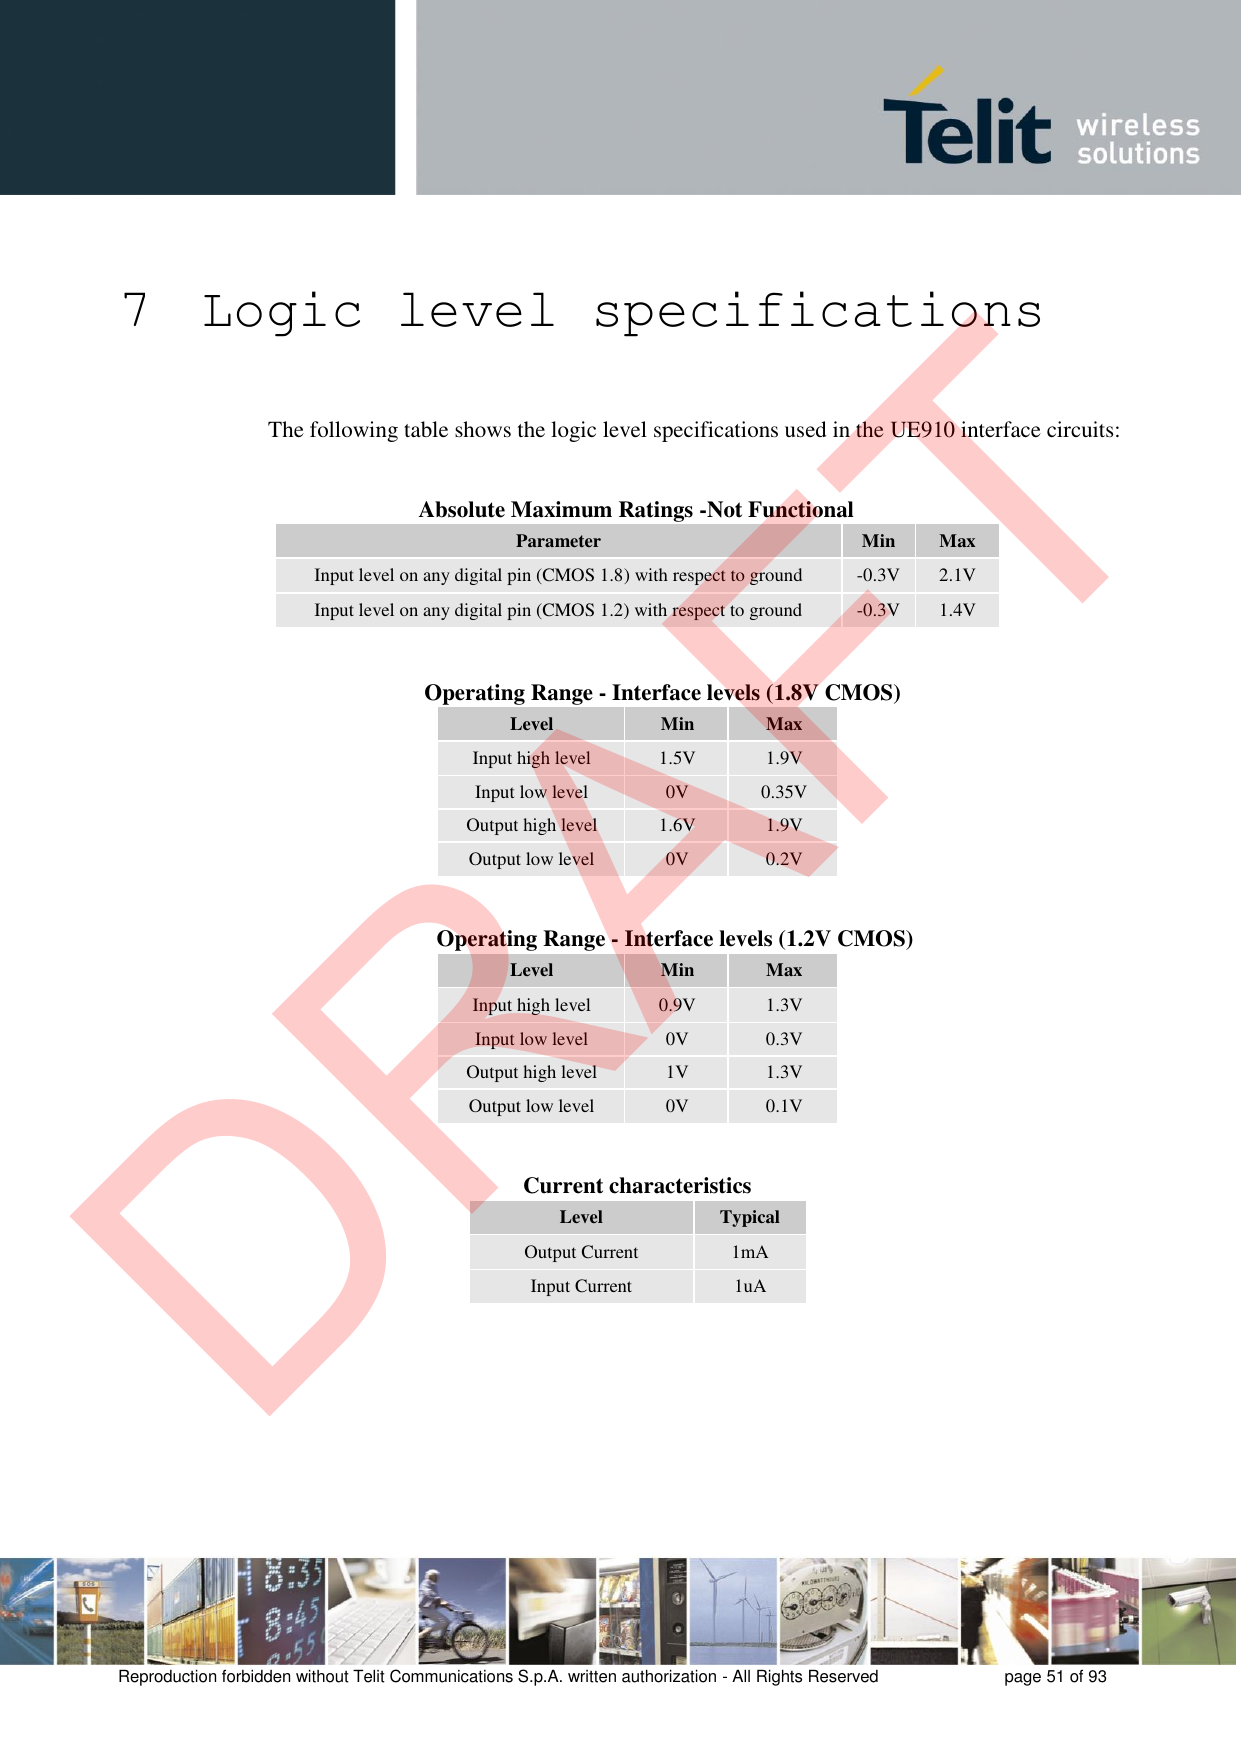 Reproduction forbidden without Telit Communications S.p.A. written authorization - All Rights Reserved  page 51 of 93 7 Logic level specifications The following table shows the logic level specifications used in the UE910 interface circuits:       Absolute Maximum Ratings -Not Functional Parameter Min Max Input level on any digital pin (CMOS 1.8) with respect to ground -0.3V2.1V Input level on any digital pin (CMOS 1.2) with respect to ground -0.3V1.4V        Operating Range - Interface levels (1.8V CMOS) Level Min Max Input high level 1.5V 1.9V Input low level 0V 0.35V Output high level 1.6V 1.9V Output low level 0V 0.2V Operating Range - Interface levels (1.2V CMOS) Level Min Max Input high level 0.9V 1.3V Input low level 0V 0.3V Output high level 1V 1.3V Output low level 0V 0.1V Current characteristics Level Typical Output Current 1mA Input Current 1uA DRAFT